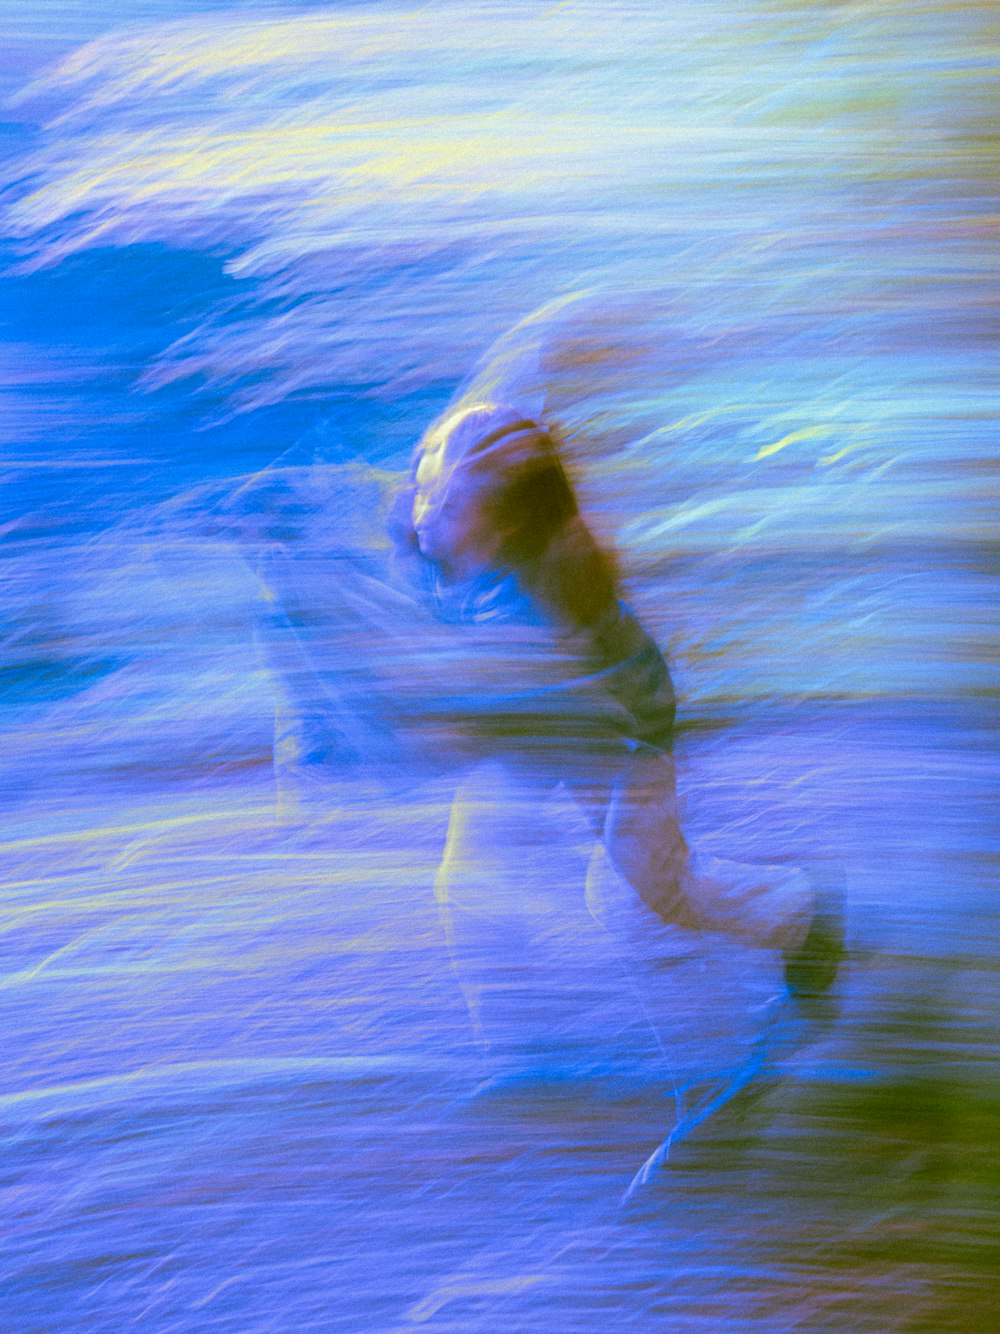 a blurry photo of a person surfing on a wave